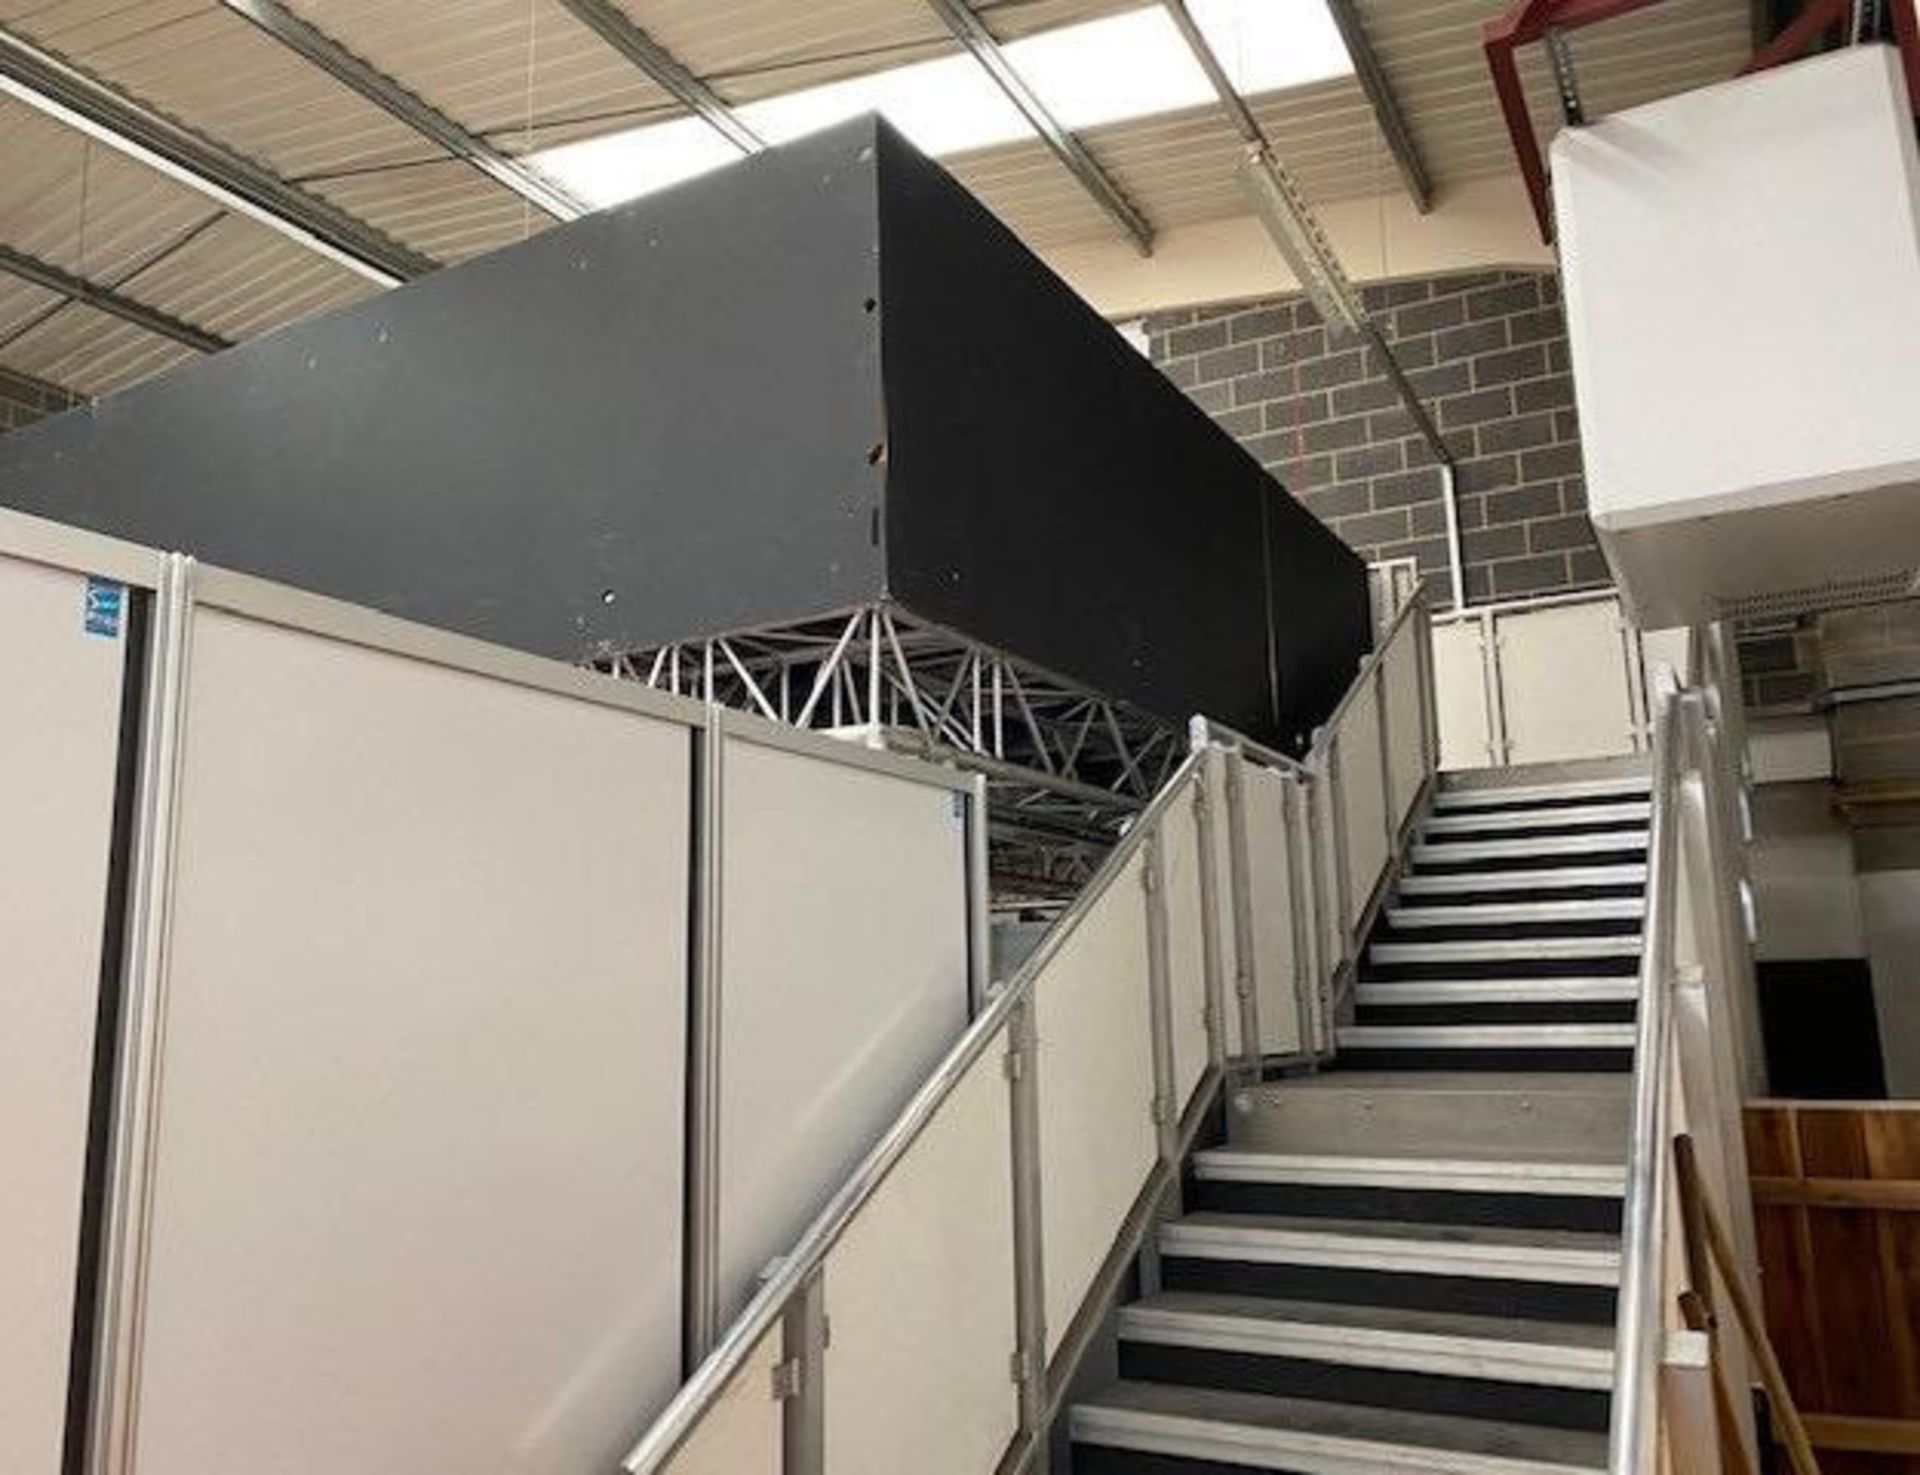 1 x 8m x 10m Truss Mezzanine with Staircase, Solid Floor And Ballustrade- CL548 - Location: Near - Image 5 of 10